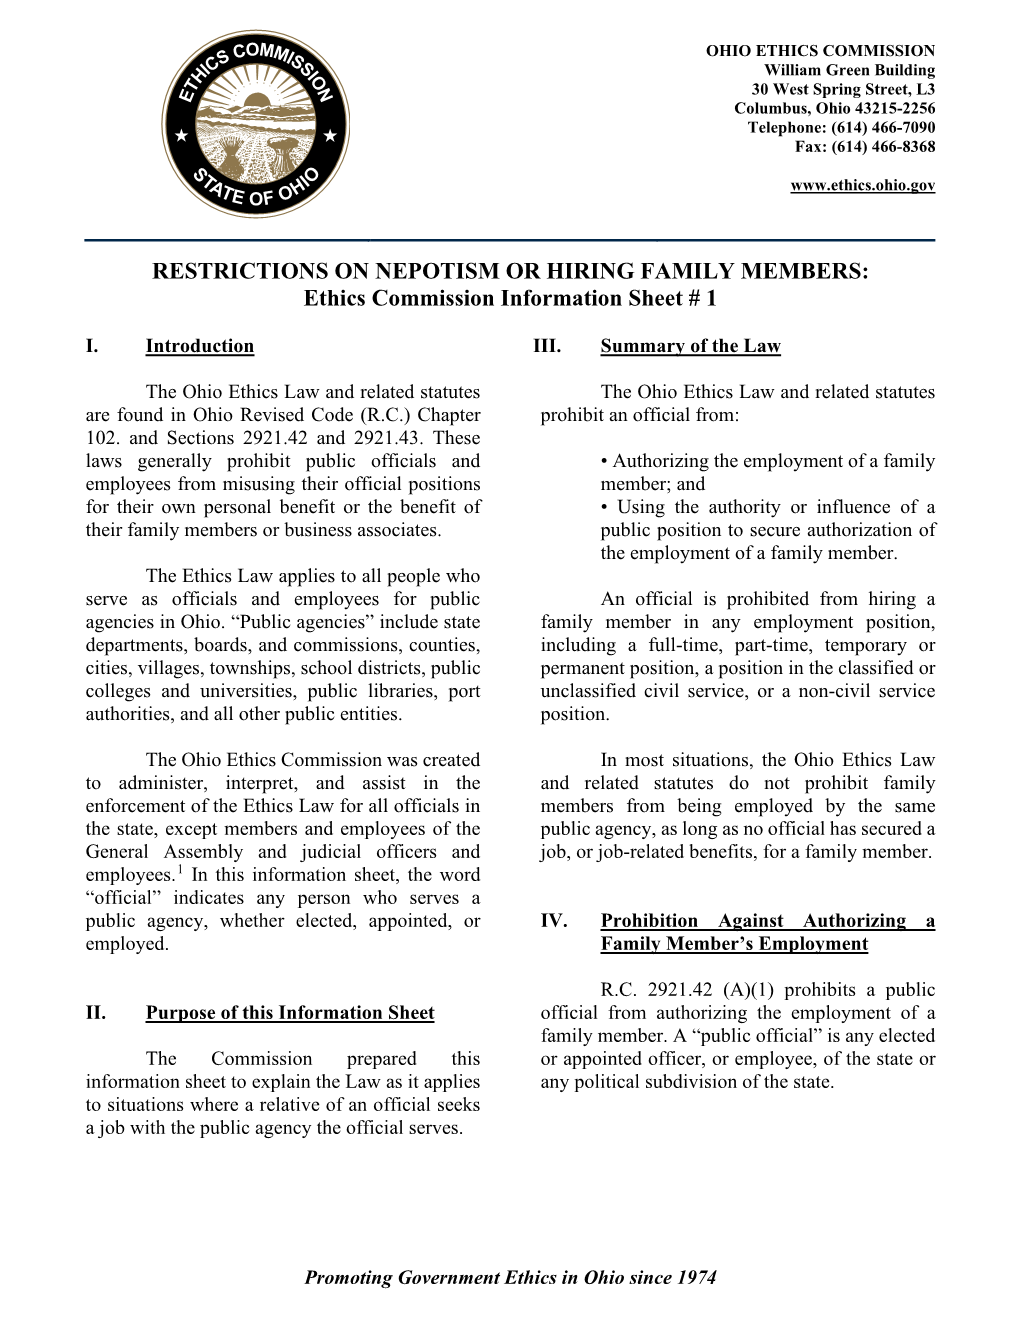 NEPOTISM OR HIRING FAMILY MEMBERS: Ethics Commission Information Sheet # 1